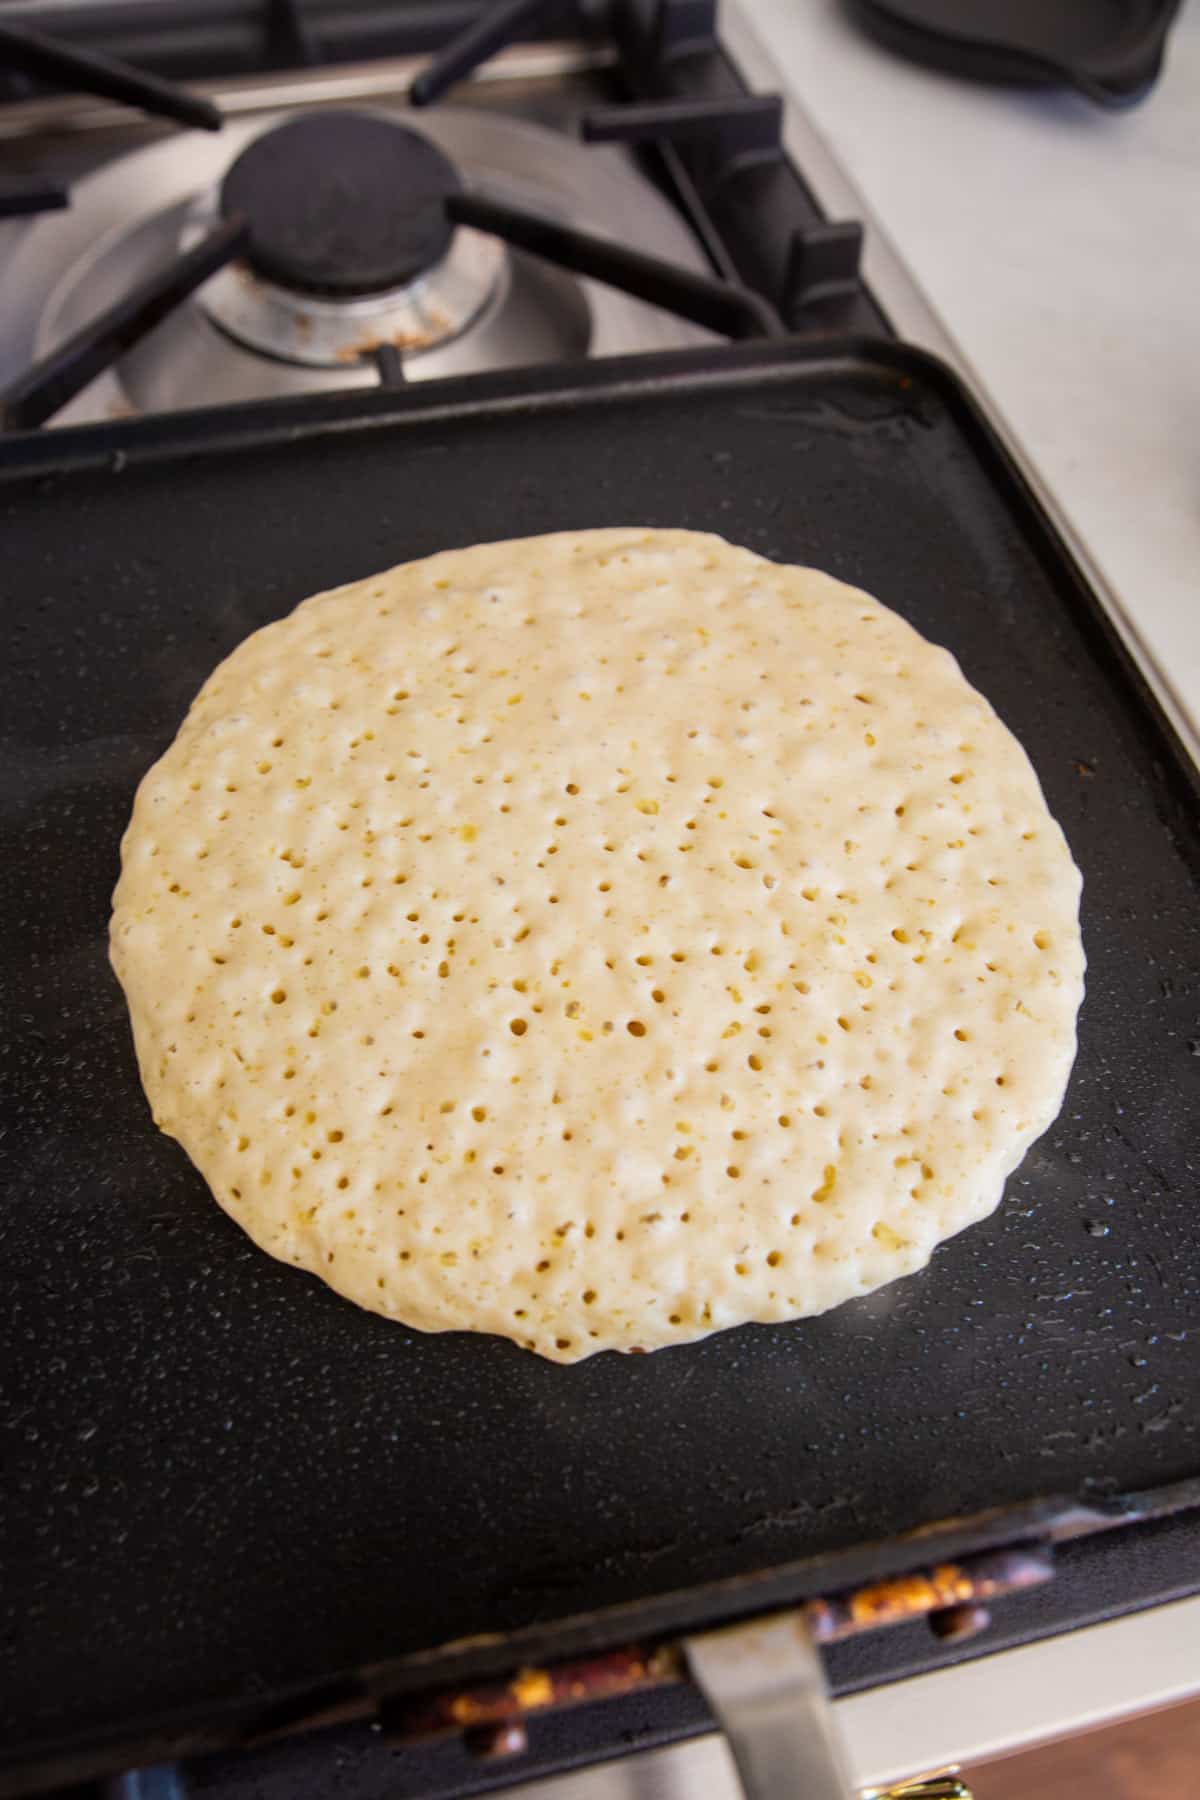 A pancake bubbling up on a square griddle on the stove top.